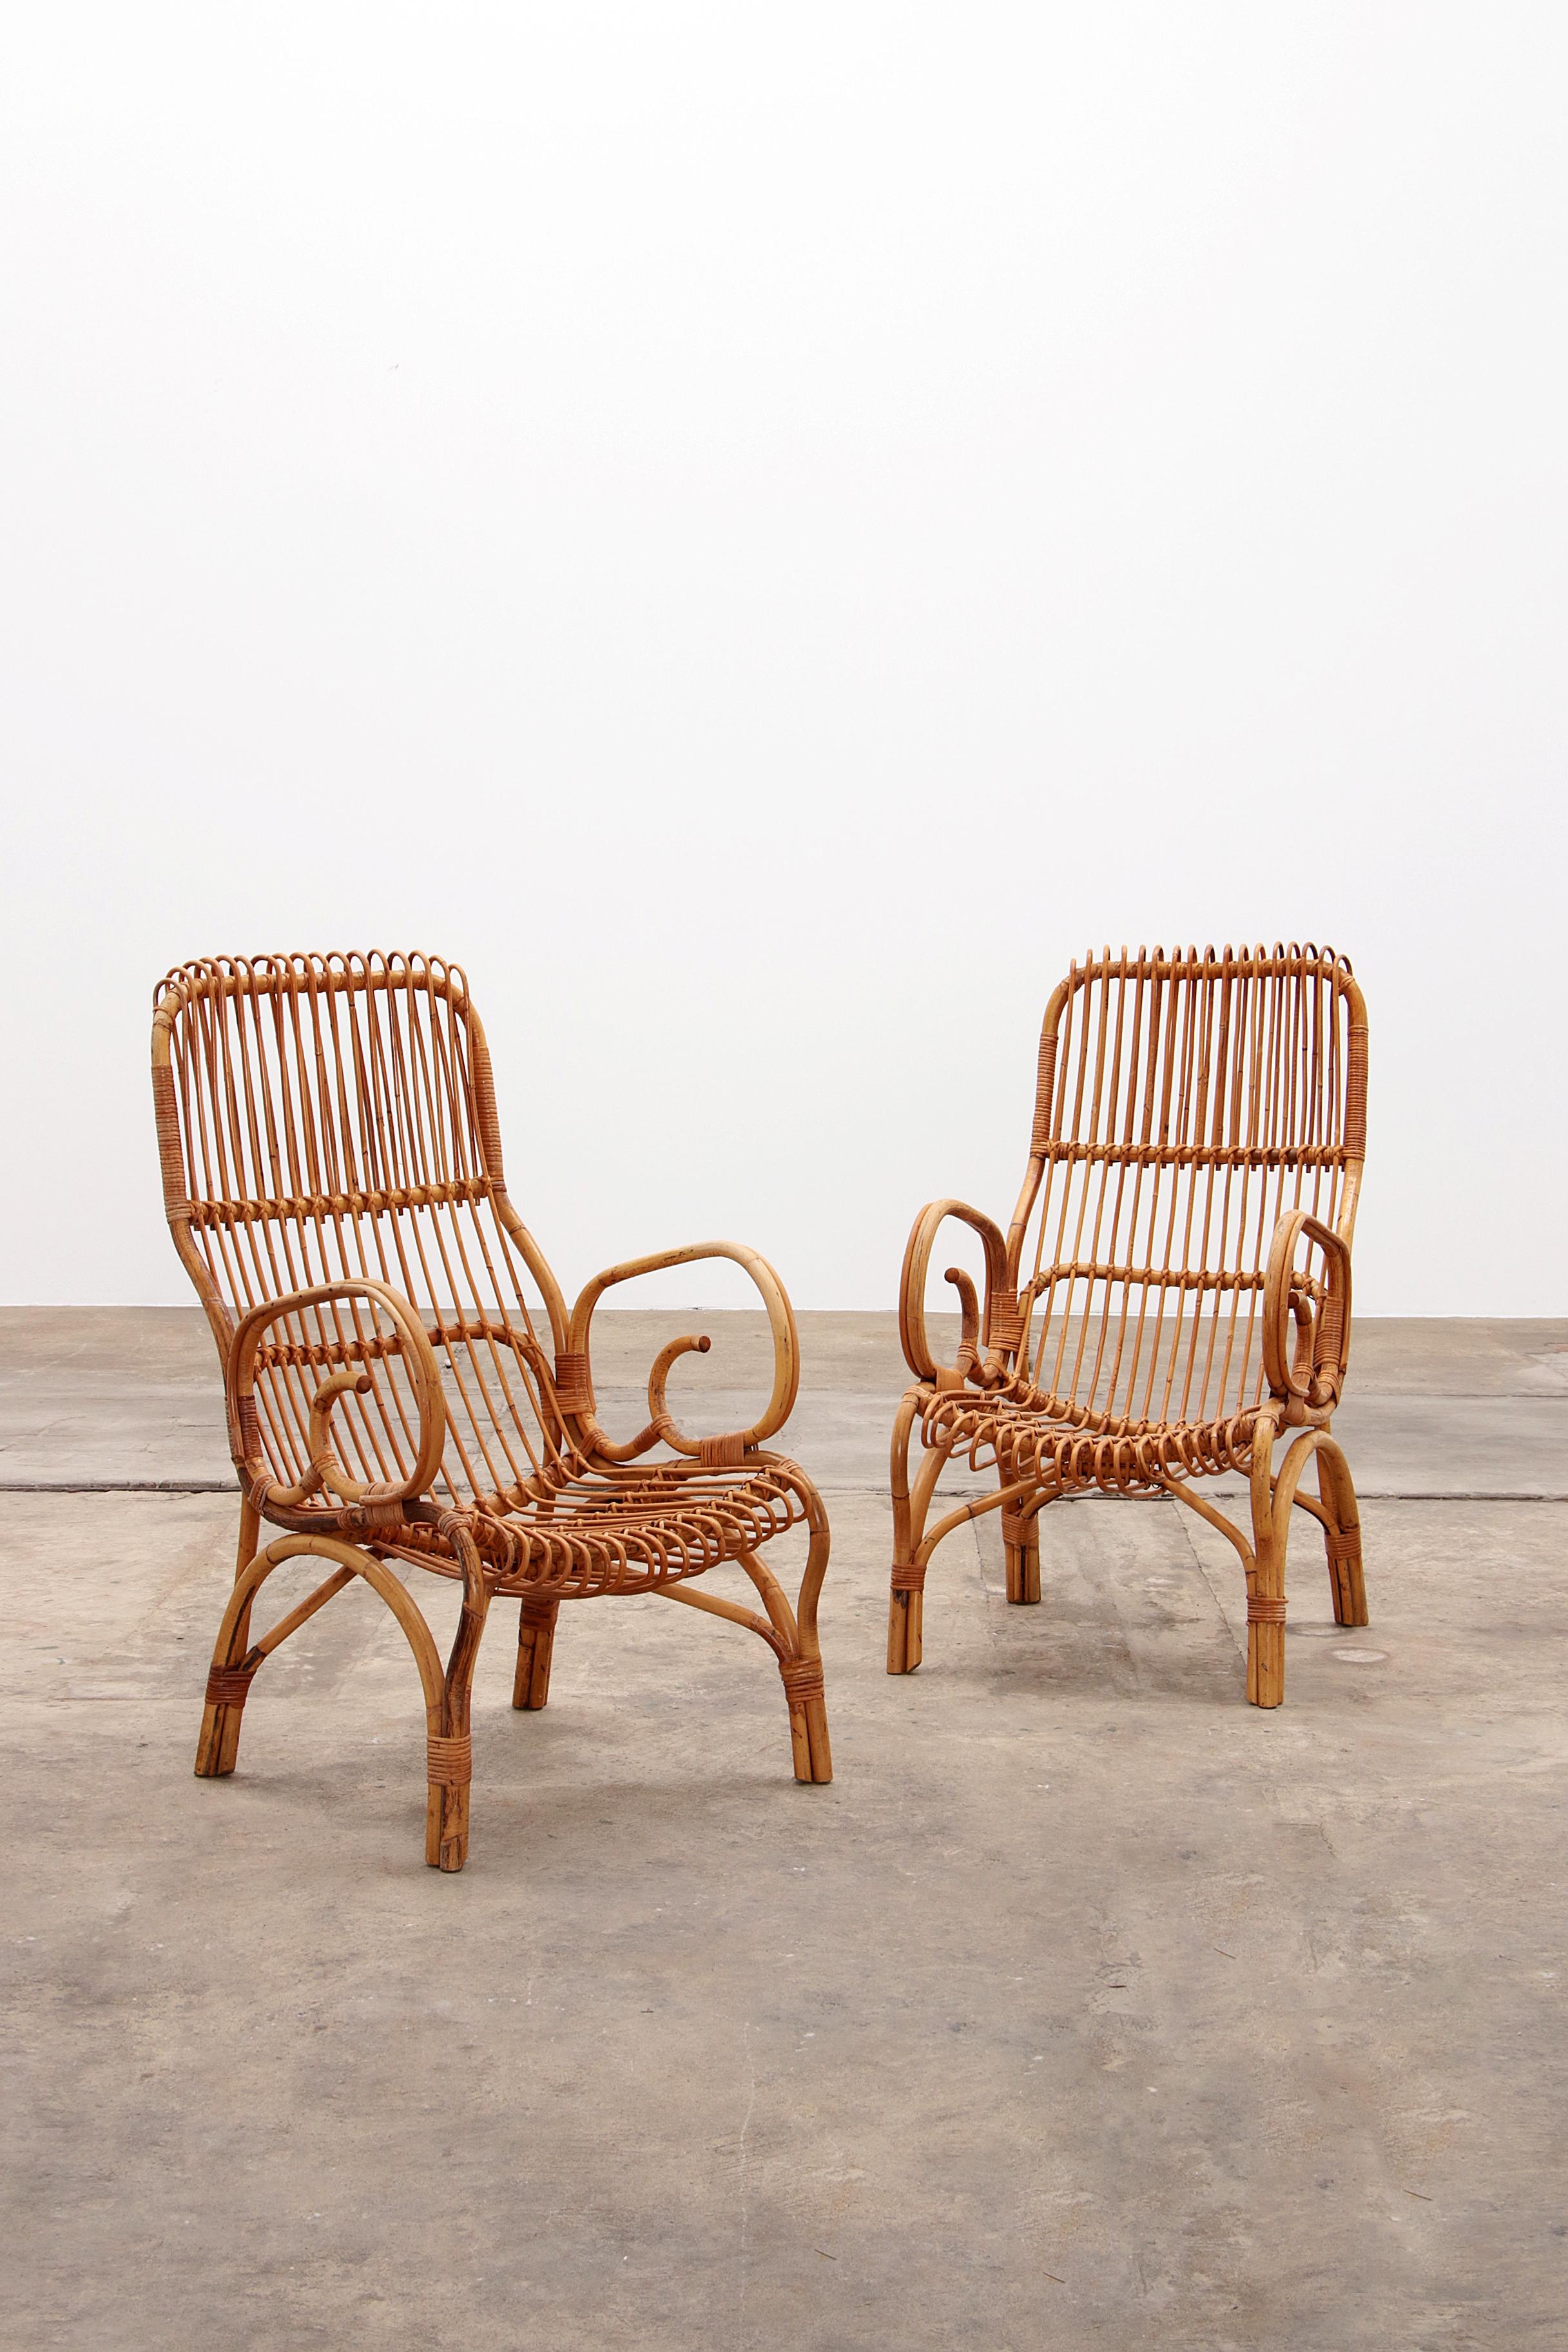 Vintage Italian rattan armchair by designer Franco Albini.

In very good vintage condition. Let the summer begin!

The first rays of the sun have already passed, so it's time for a summery interior.

This set of rattan chairs are in perfect